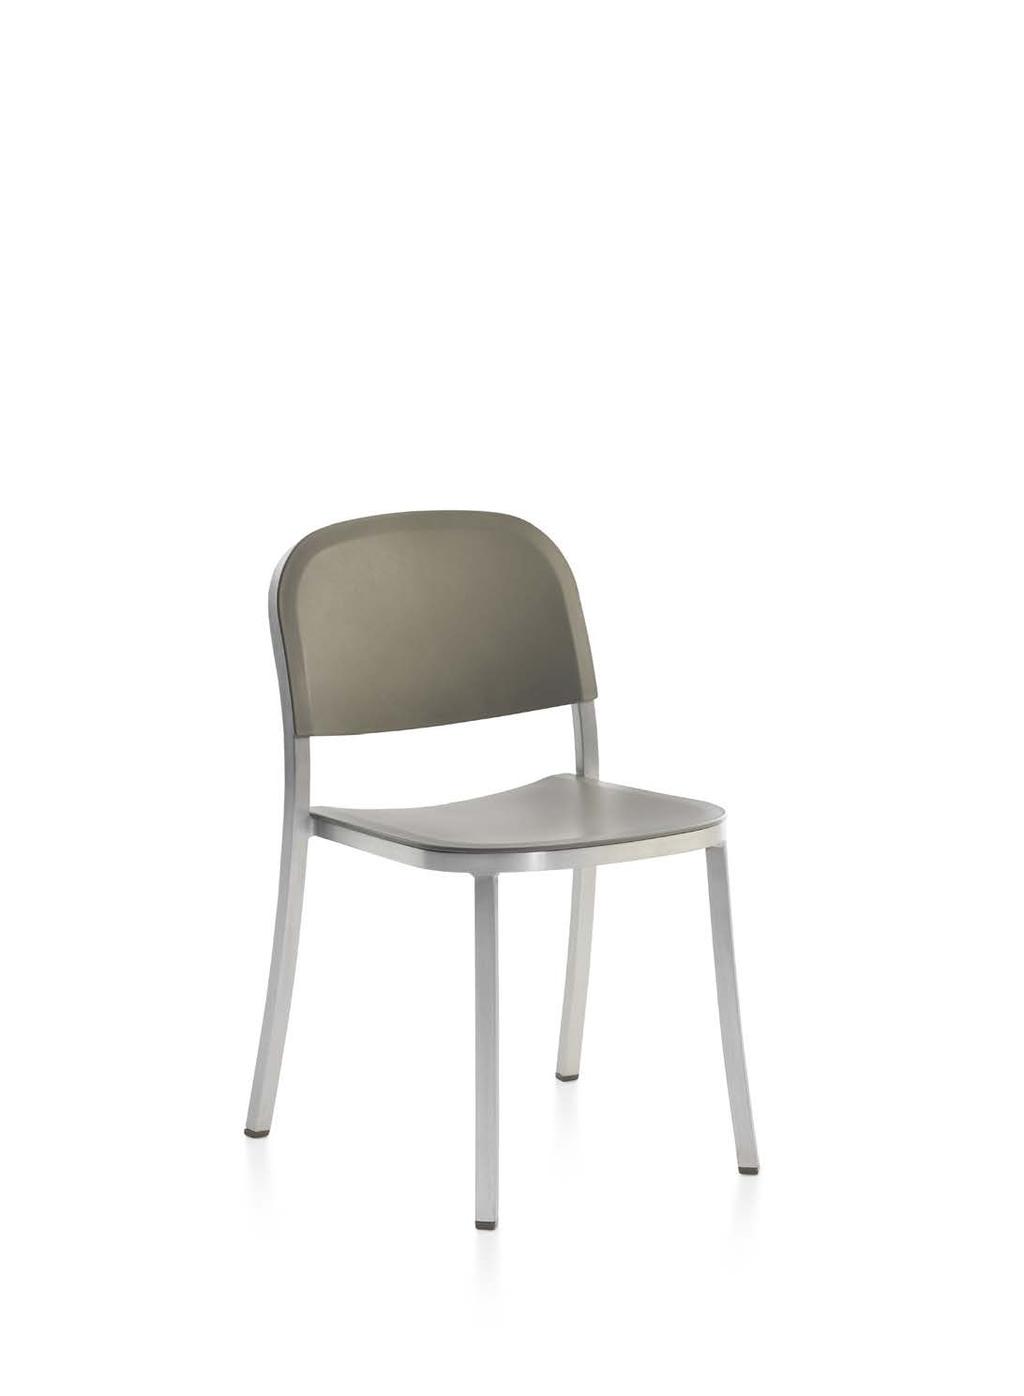 All 1 Inch chairs and stools with seats made from 100% reclaimed wood polypropylene, and frames in hand brushed, clear anodized aluminum, are suitable for outdoor use, with a selection of 7 colors.